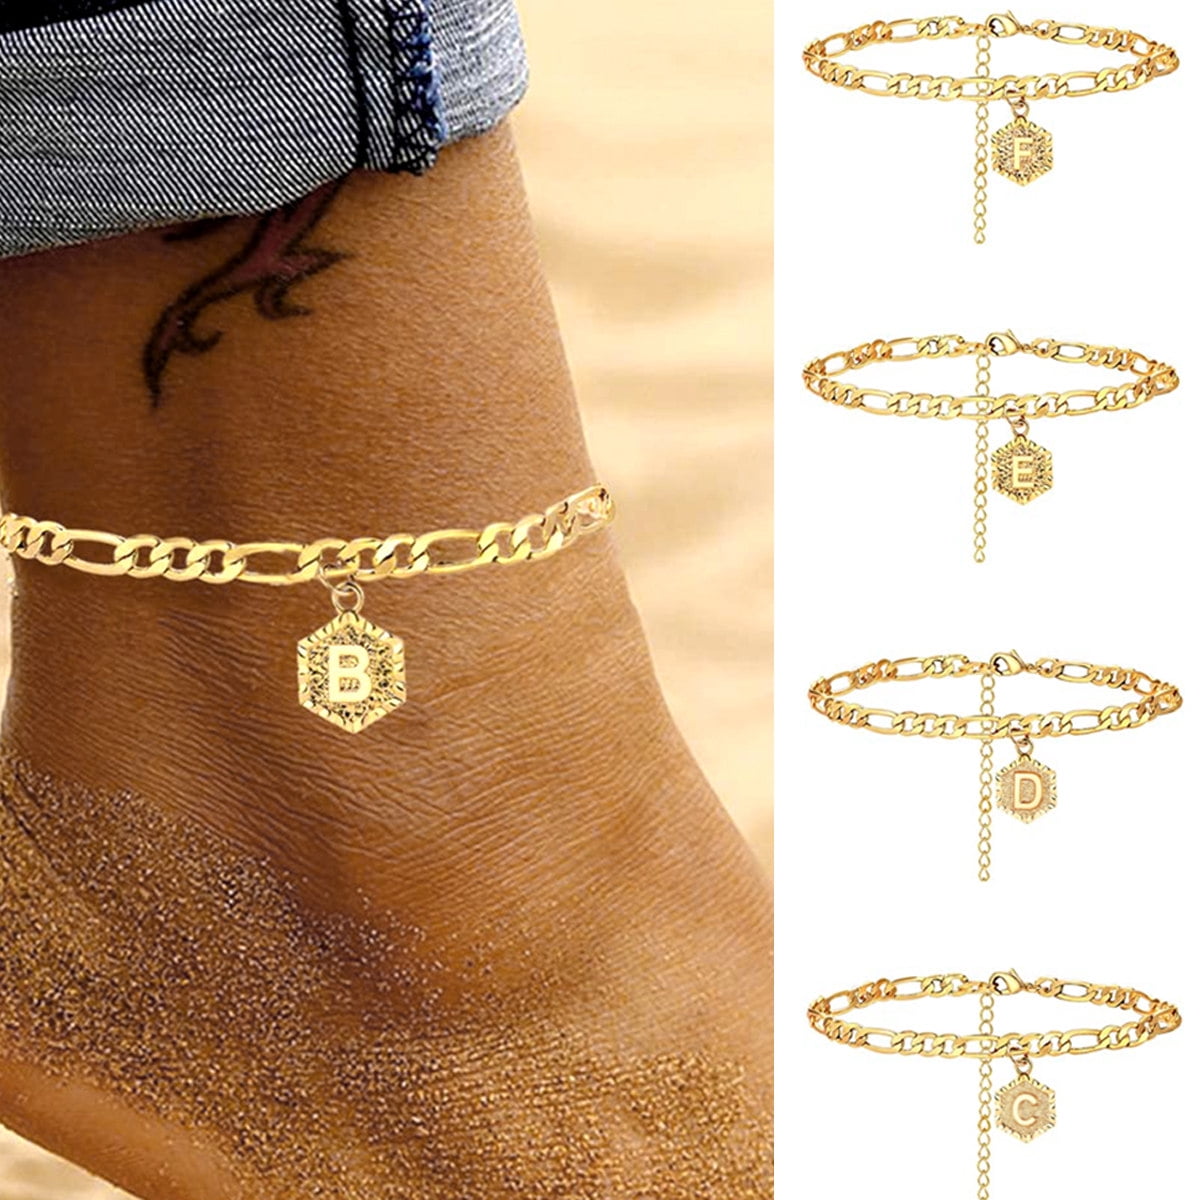 Dress Choice A to Z Initial Letter Ankle Bracelet 18K Gold Plated Anklet Charm with Letter Alphabet Cuban Link Chain Personalized Adjustable Barefoot